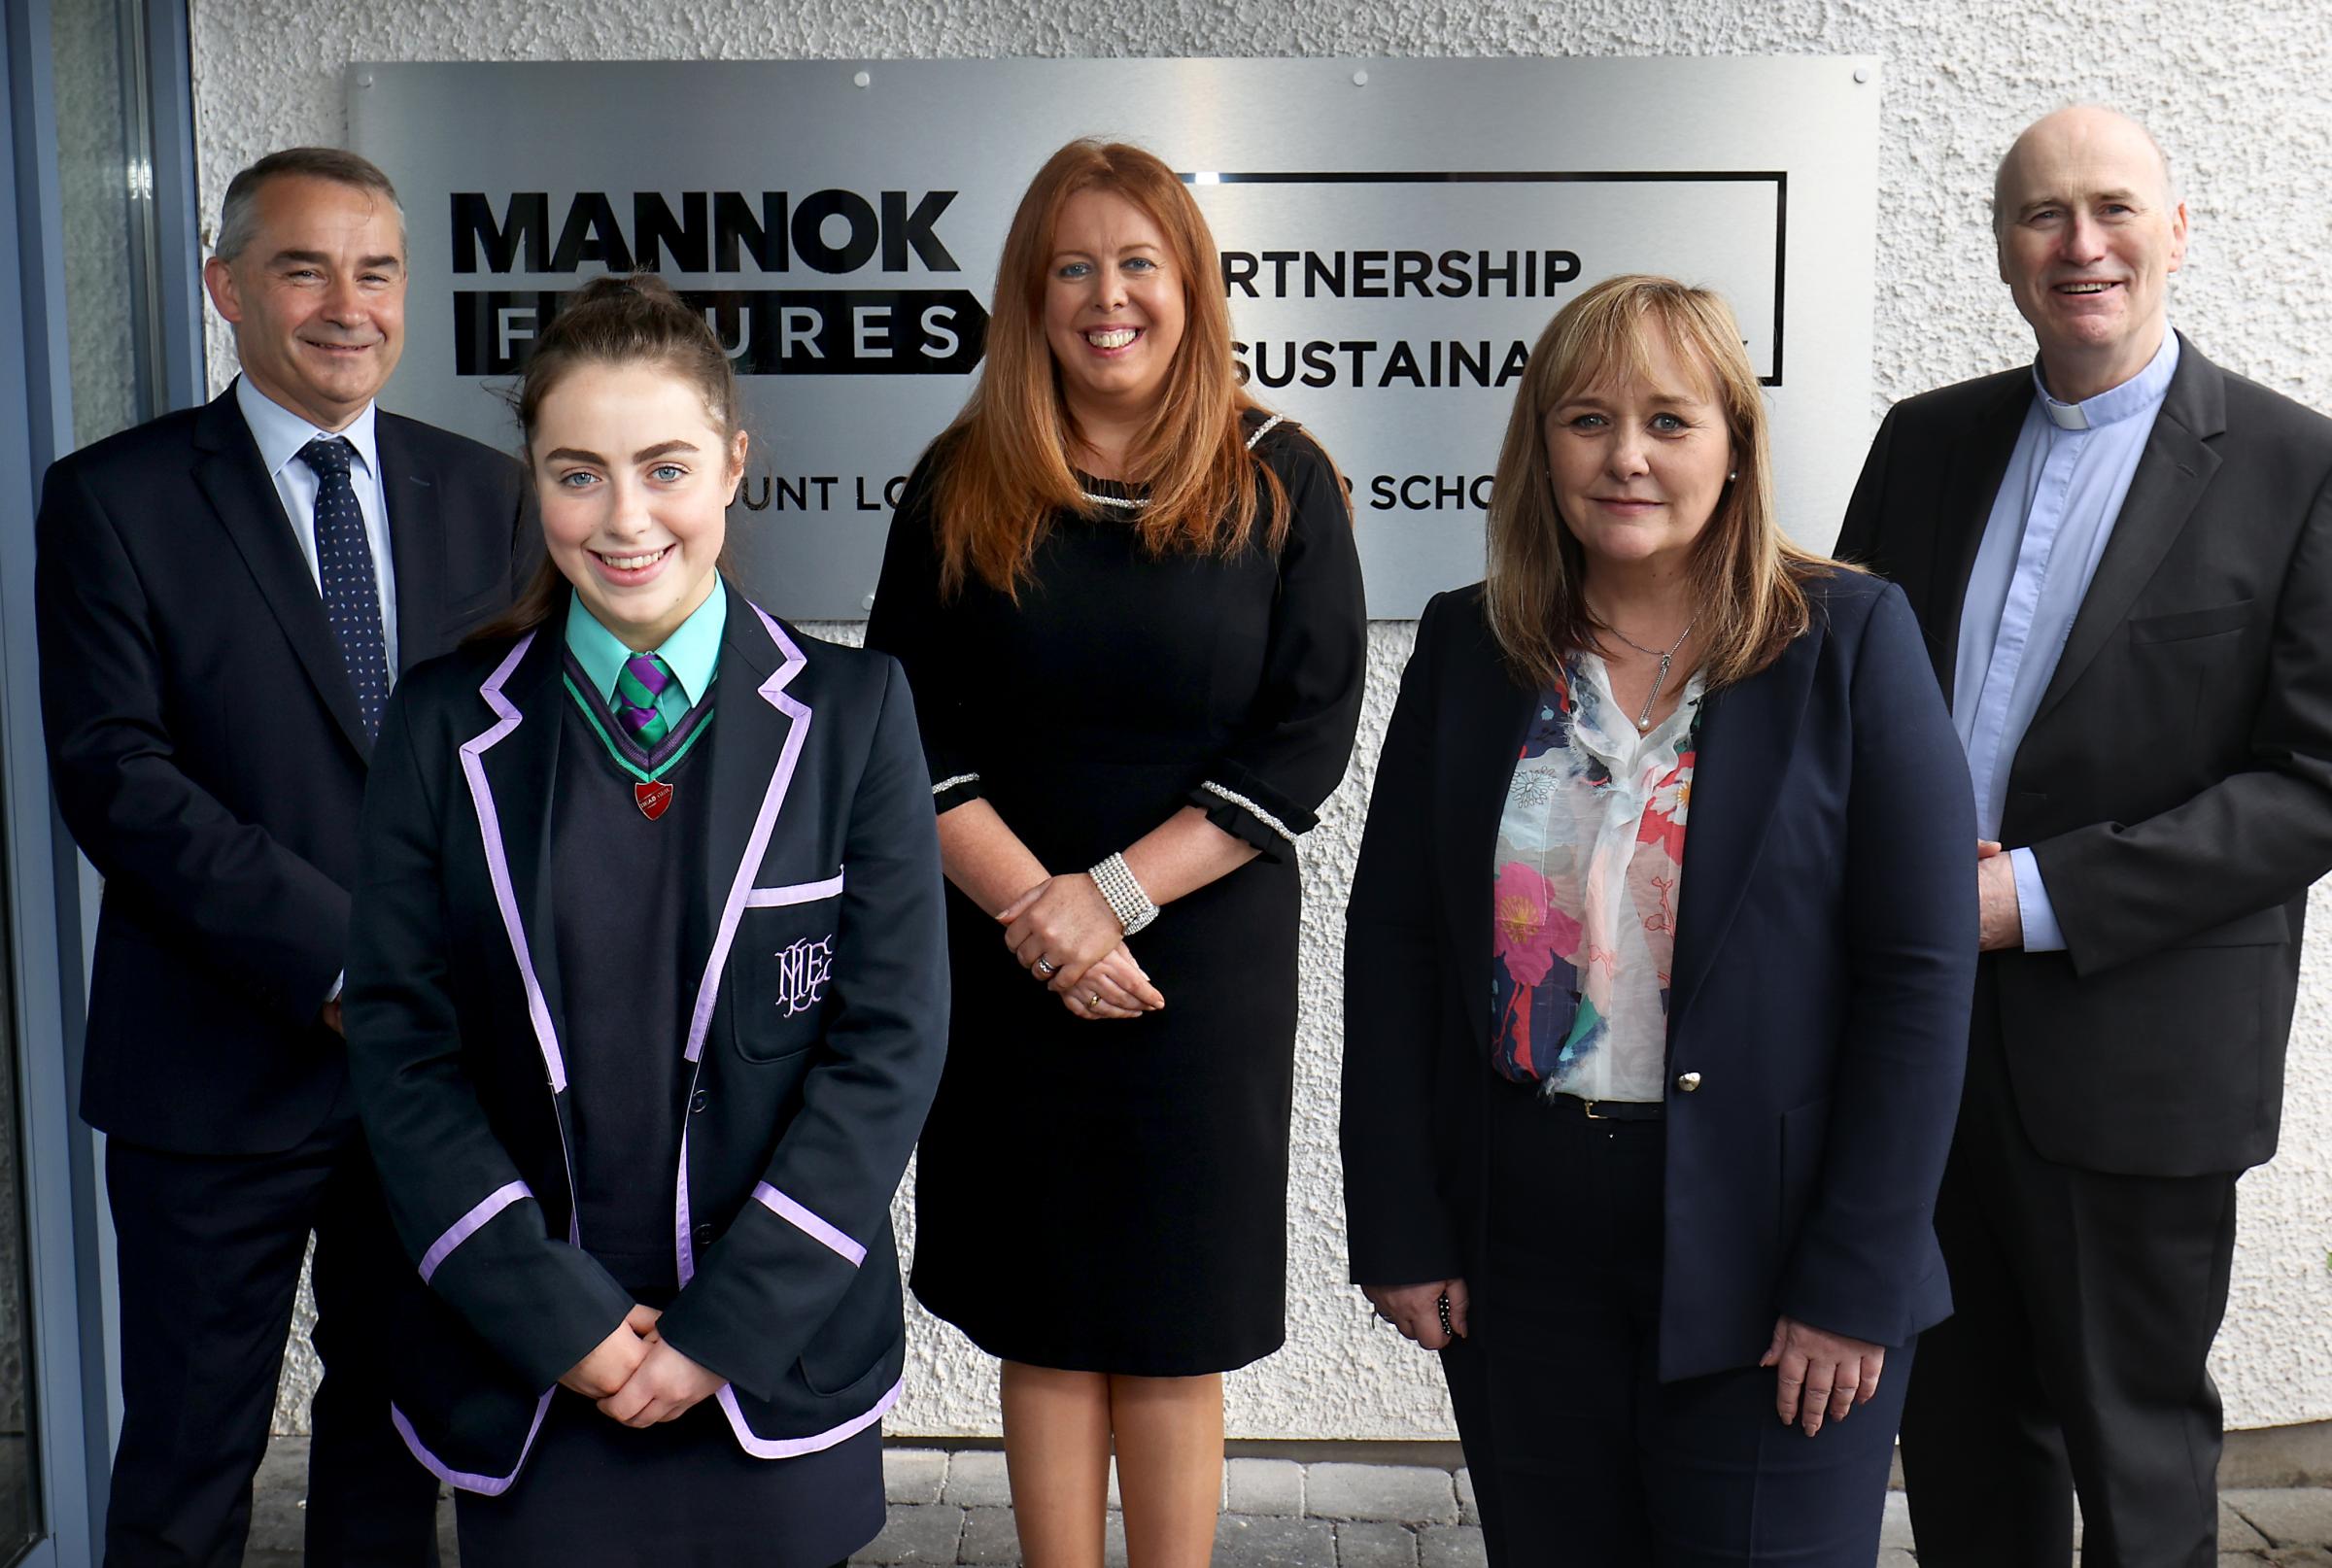 Mannok launch a five-year partnership with school